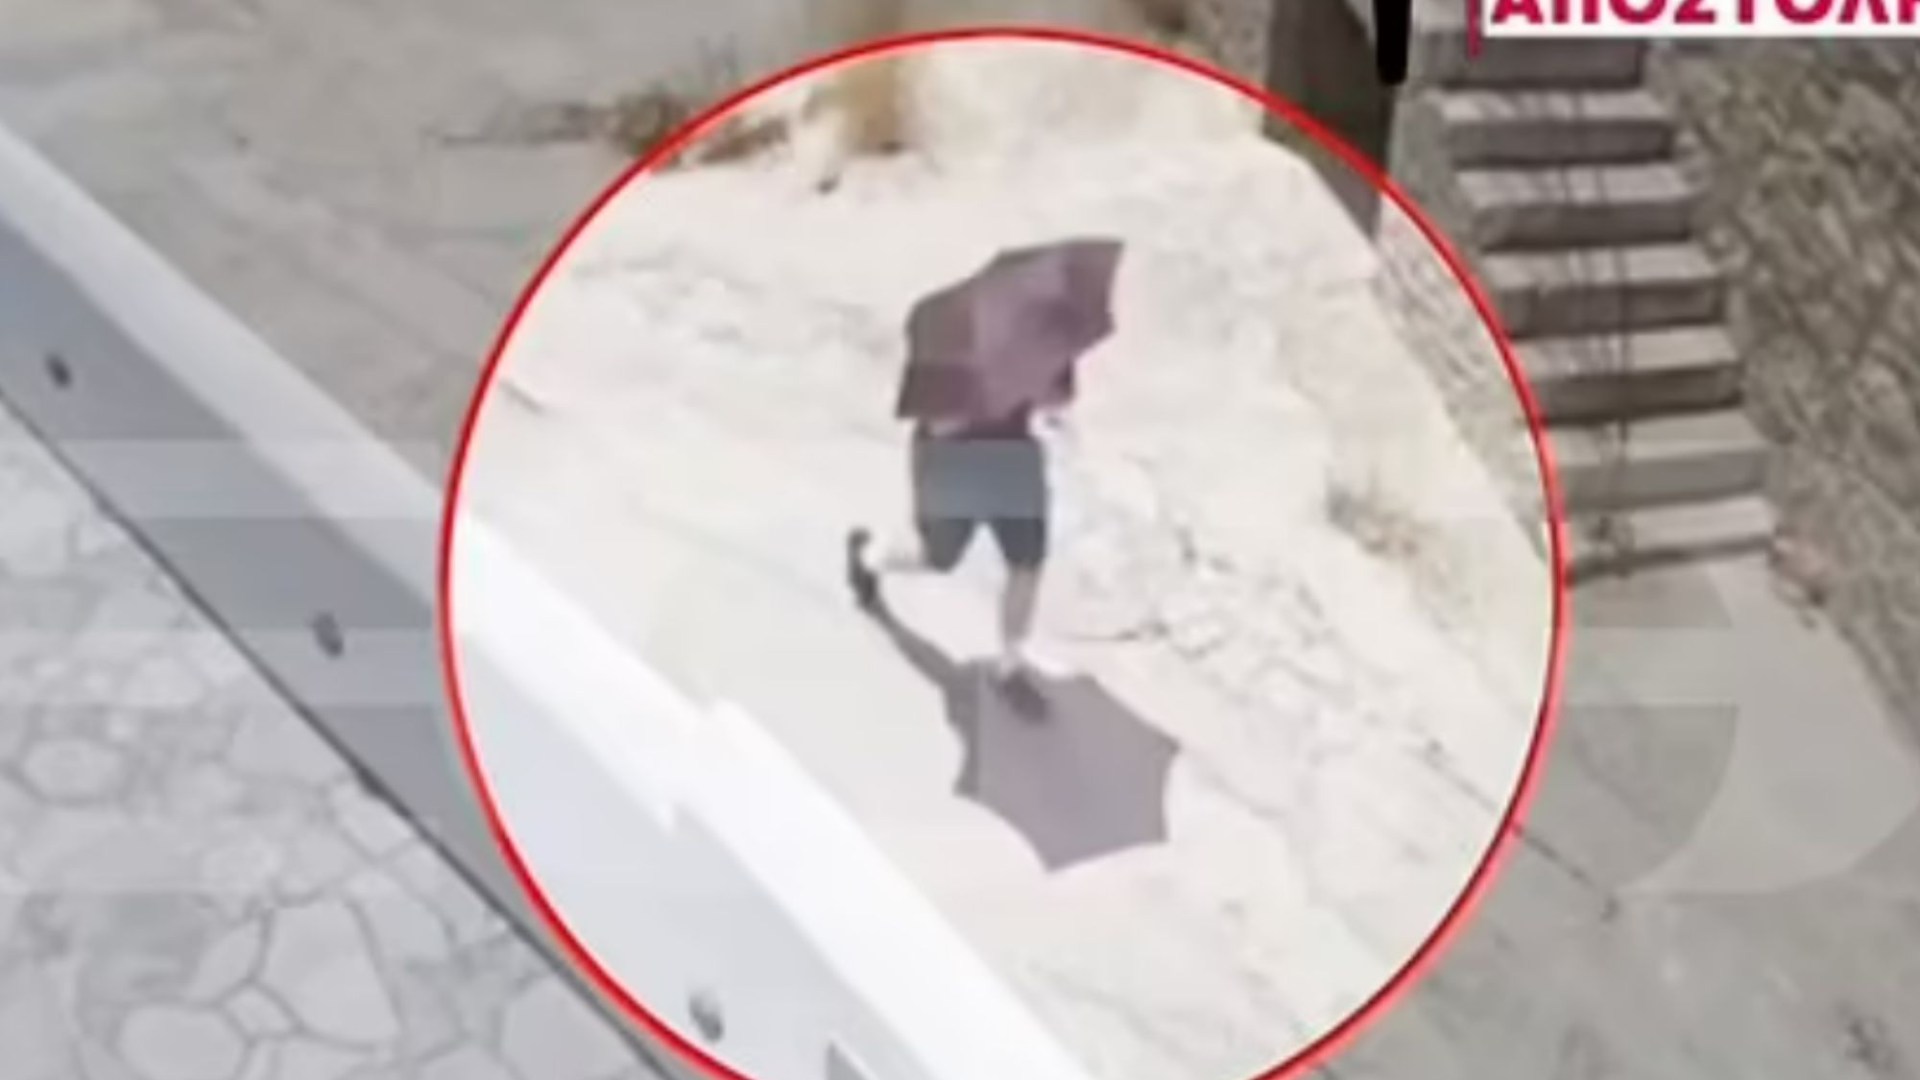 New CCTV shows Dr Michael Mosley on tragic final walk 2 hours before he died from 